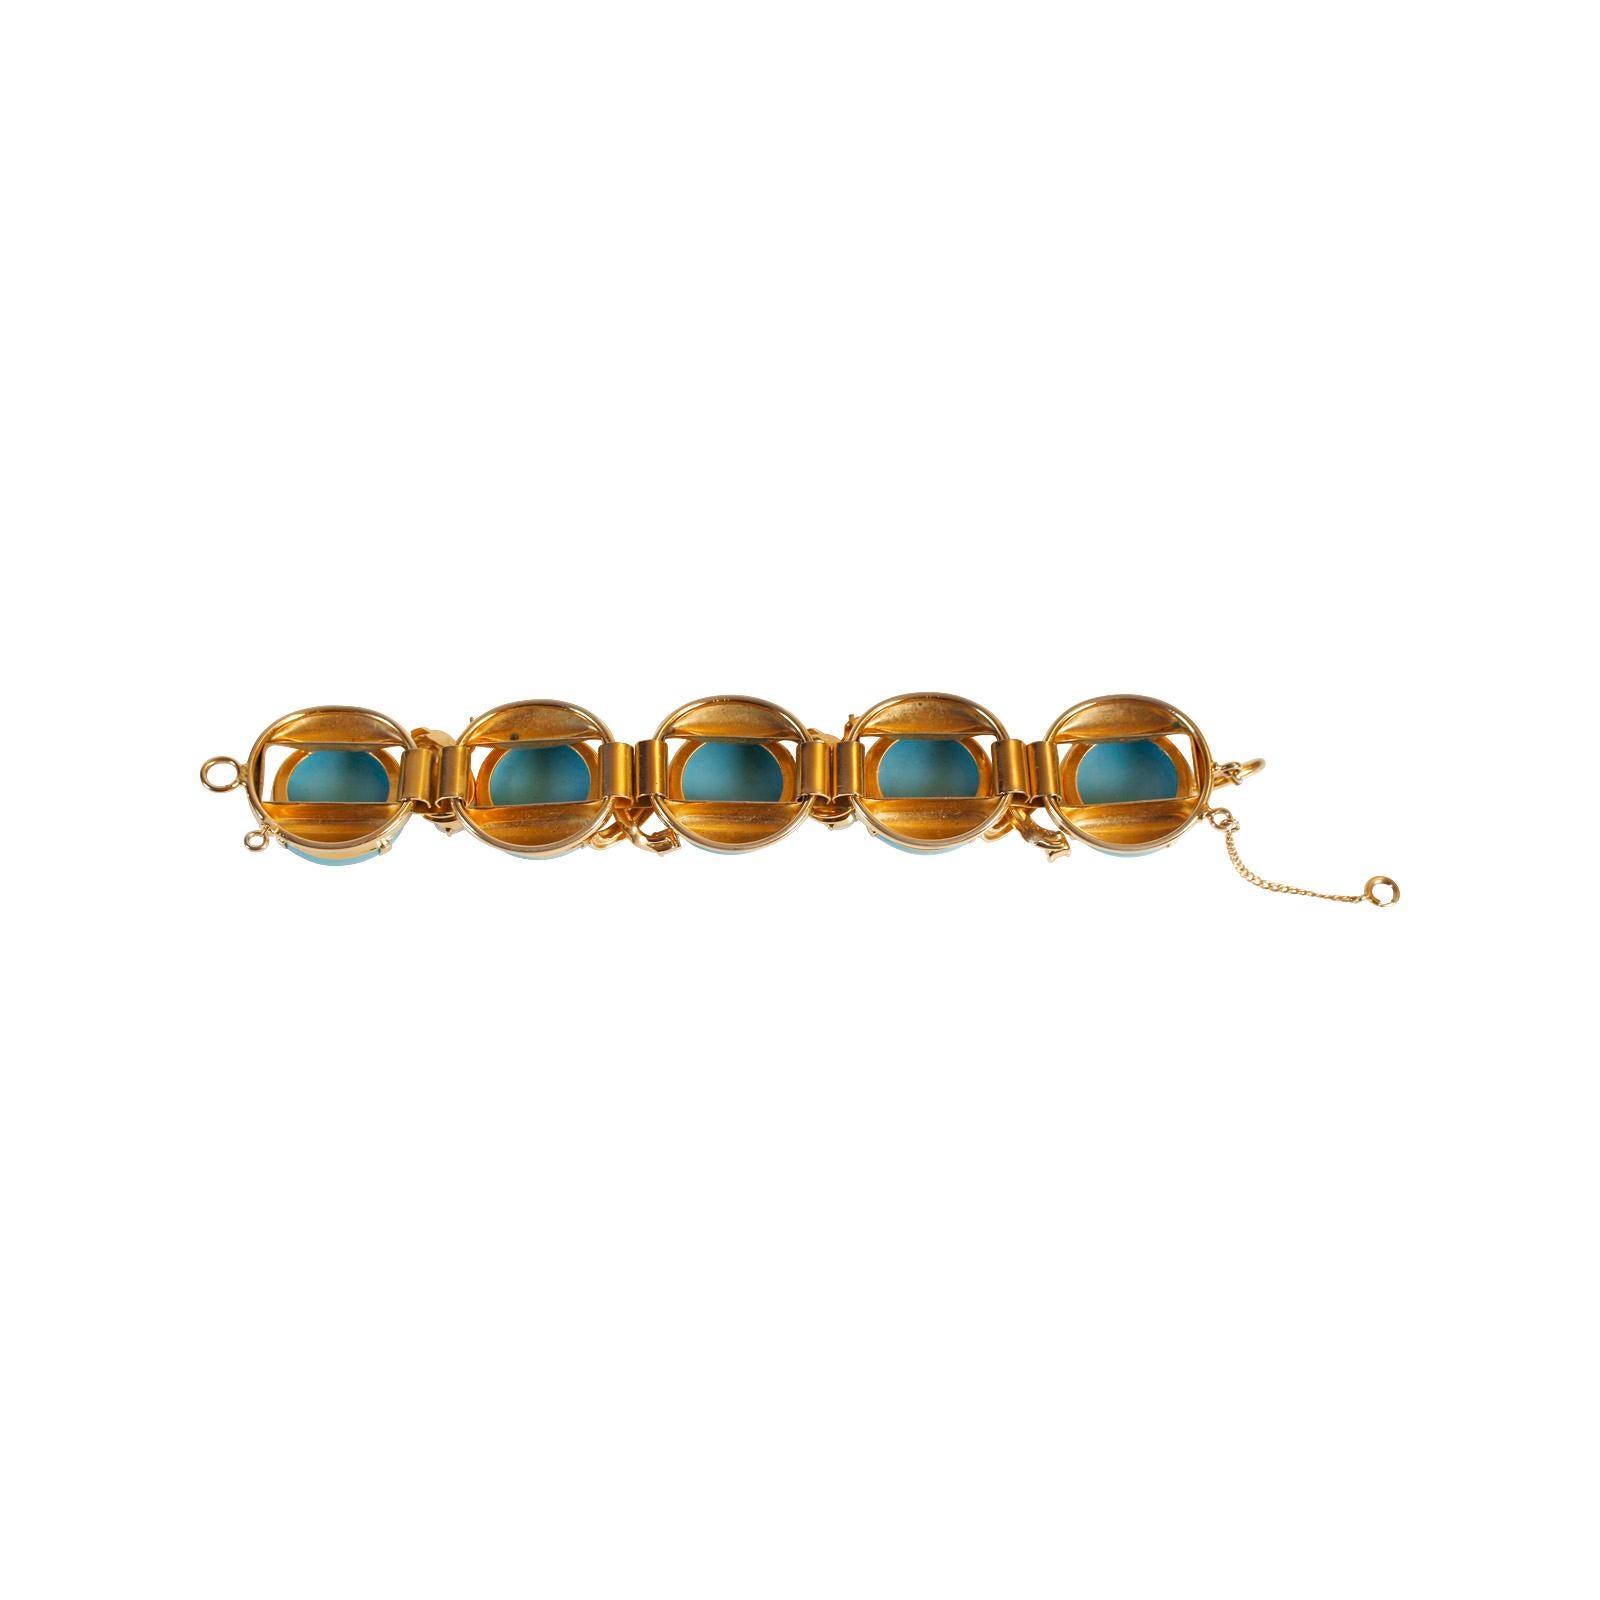 Vintage Unsigned Gold and Faux Turquoise Bracelet Circa 1960s For Sale 11